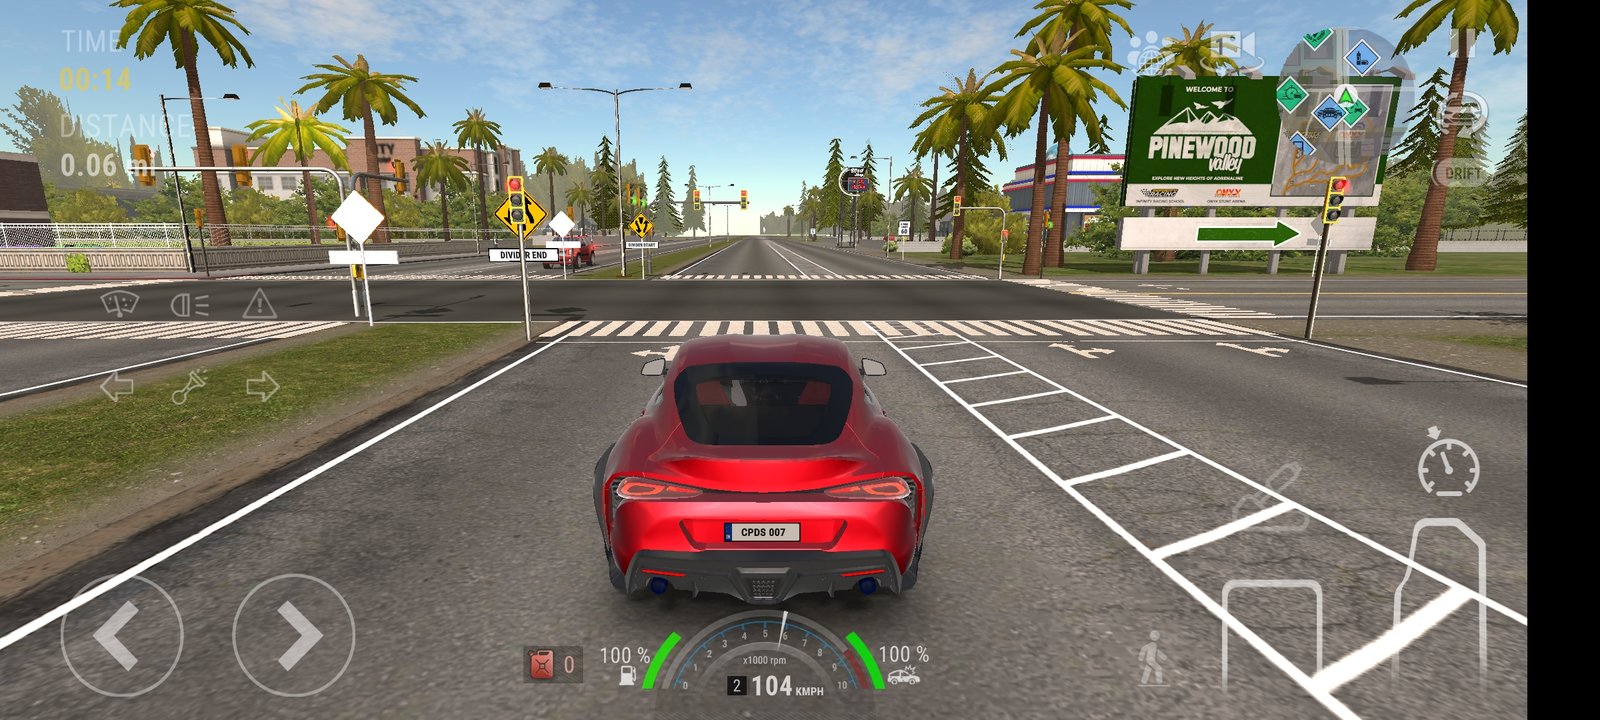 Download Car Parking - Driving School MOD APK v9.6.18 (Unlimited Money) For  Android